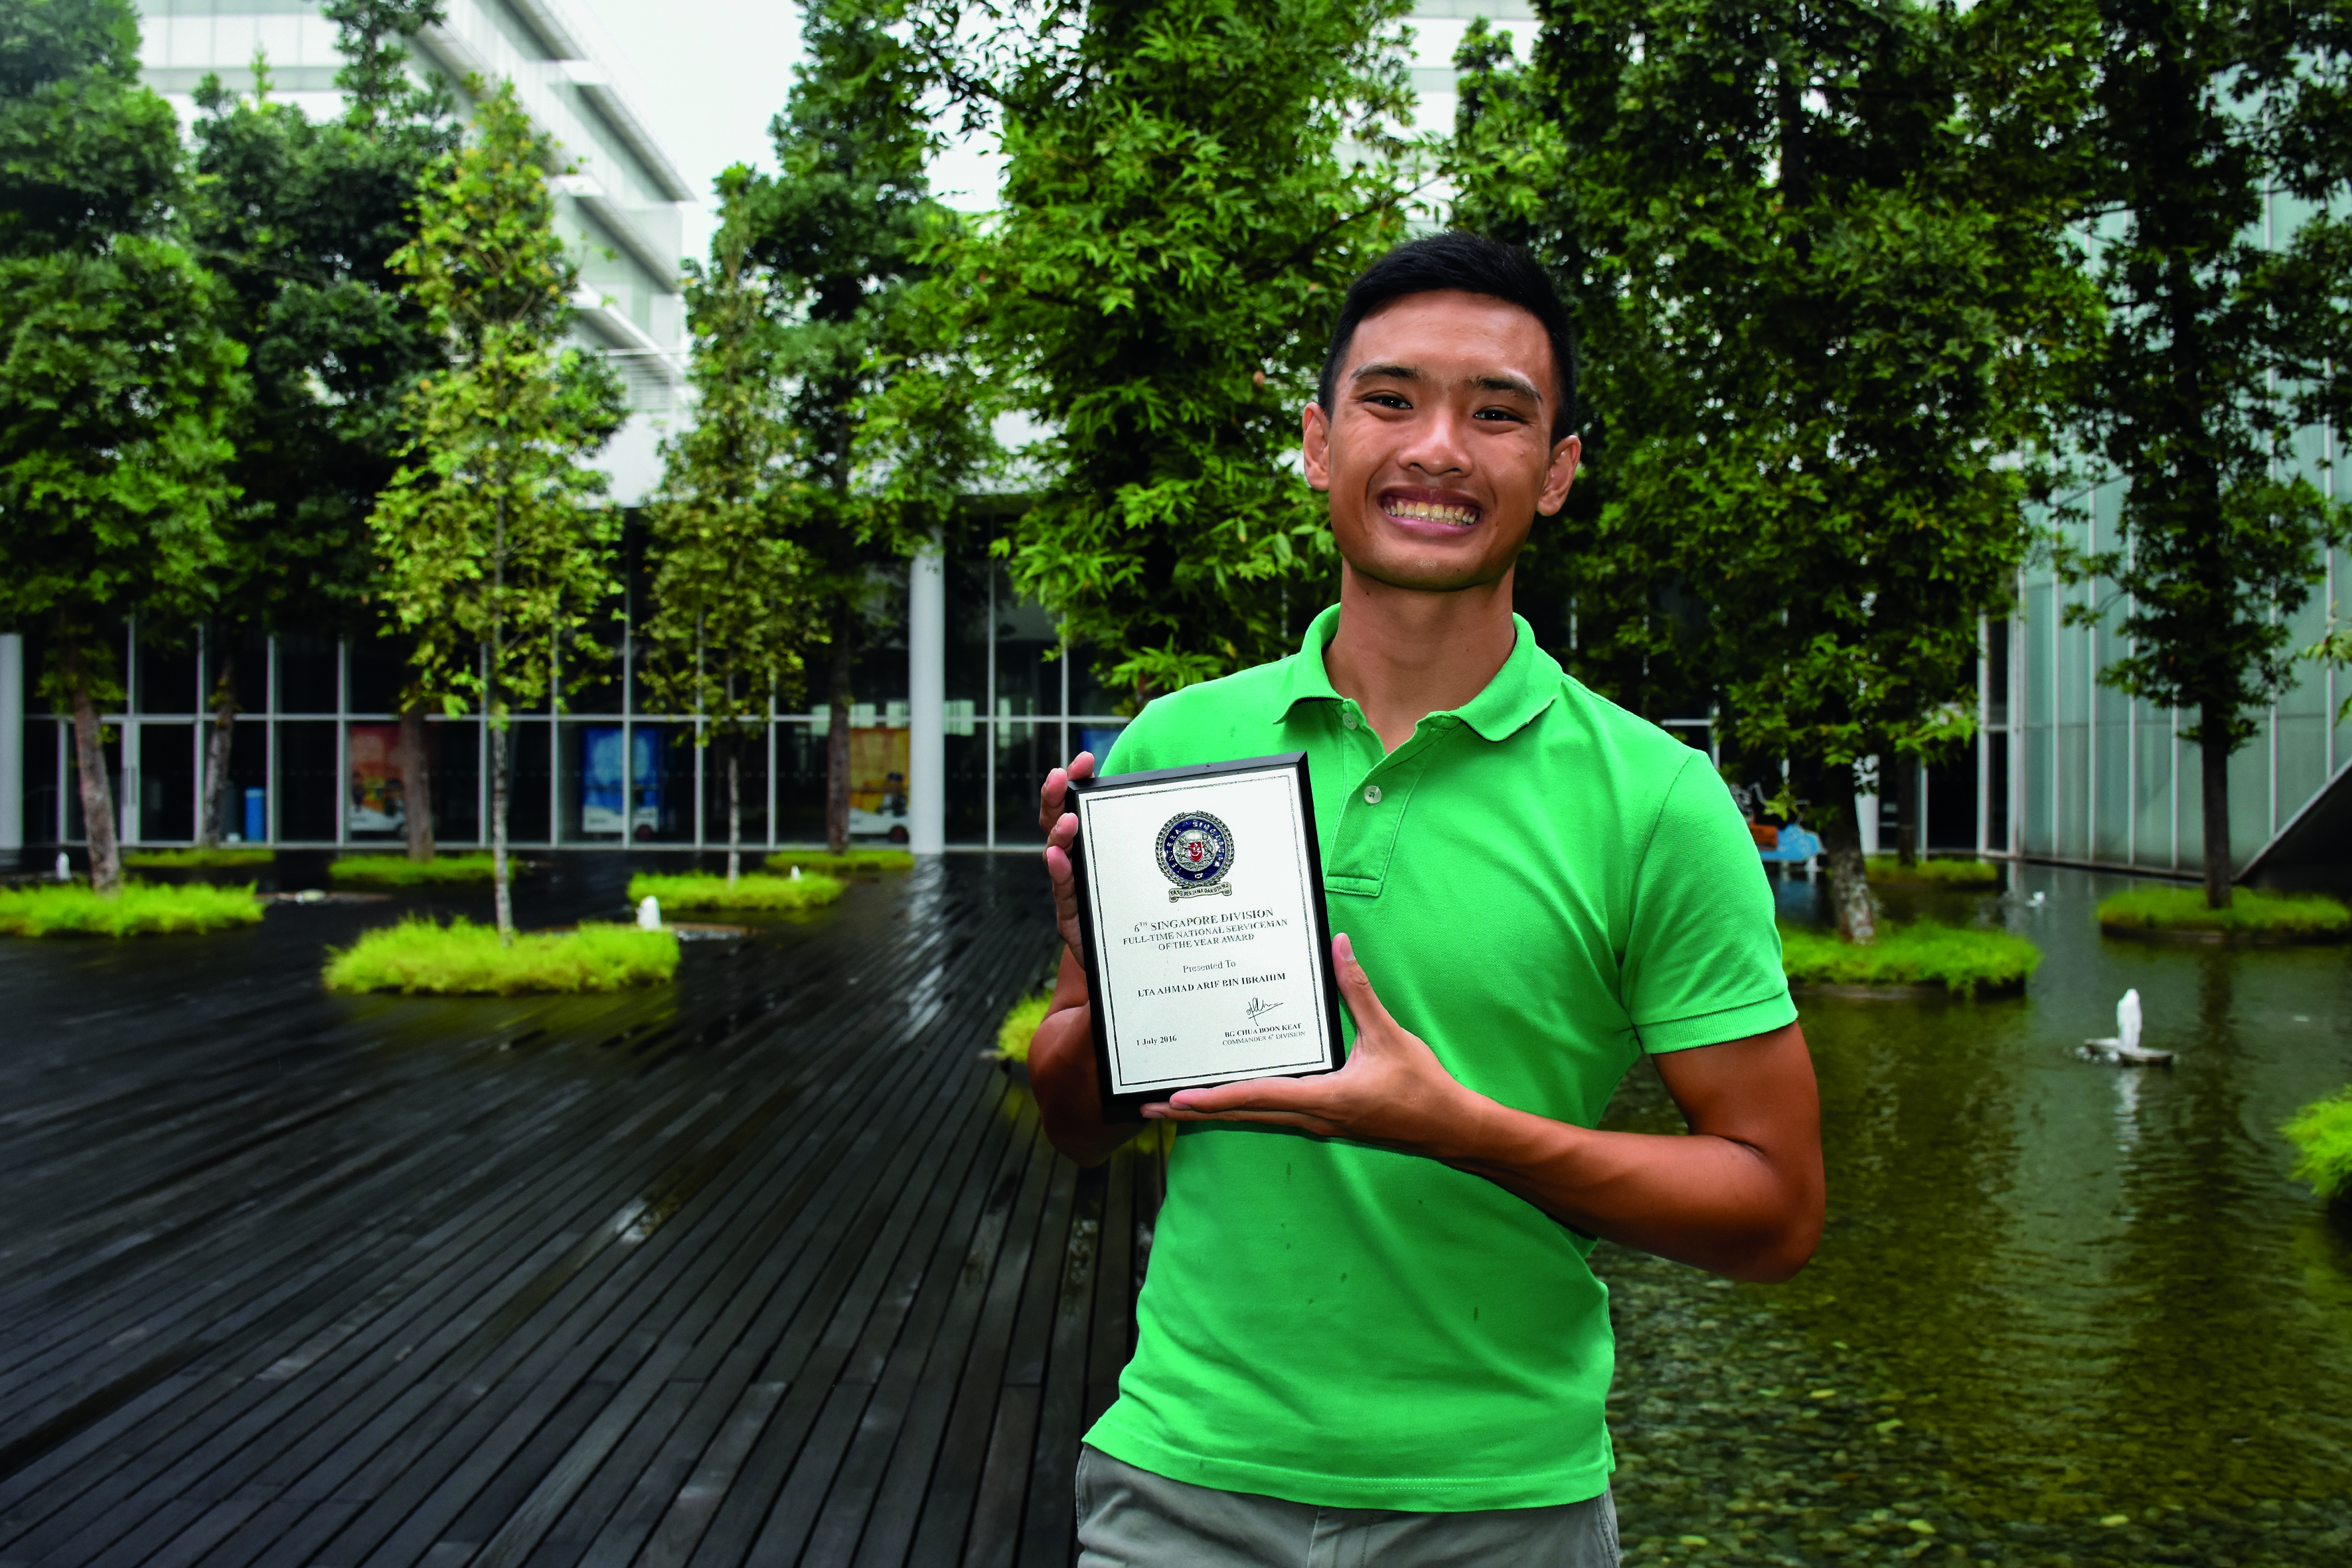 A ROLE MODEL: Diploma in Sports And Exercise Sciences alumnus Ahmad Arif Ibrahim, 23, was featured as one of MINDEF’s Soldier of the Year. The award is presented to only 28 Full-time National Servicemen (NSF) for their exceptional performance and conduct in service. PHOTO: Muhd Nurshazreen